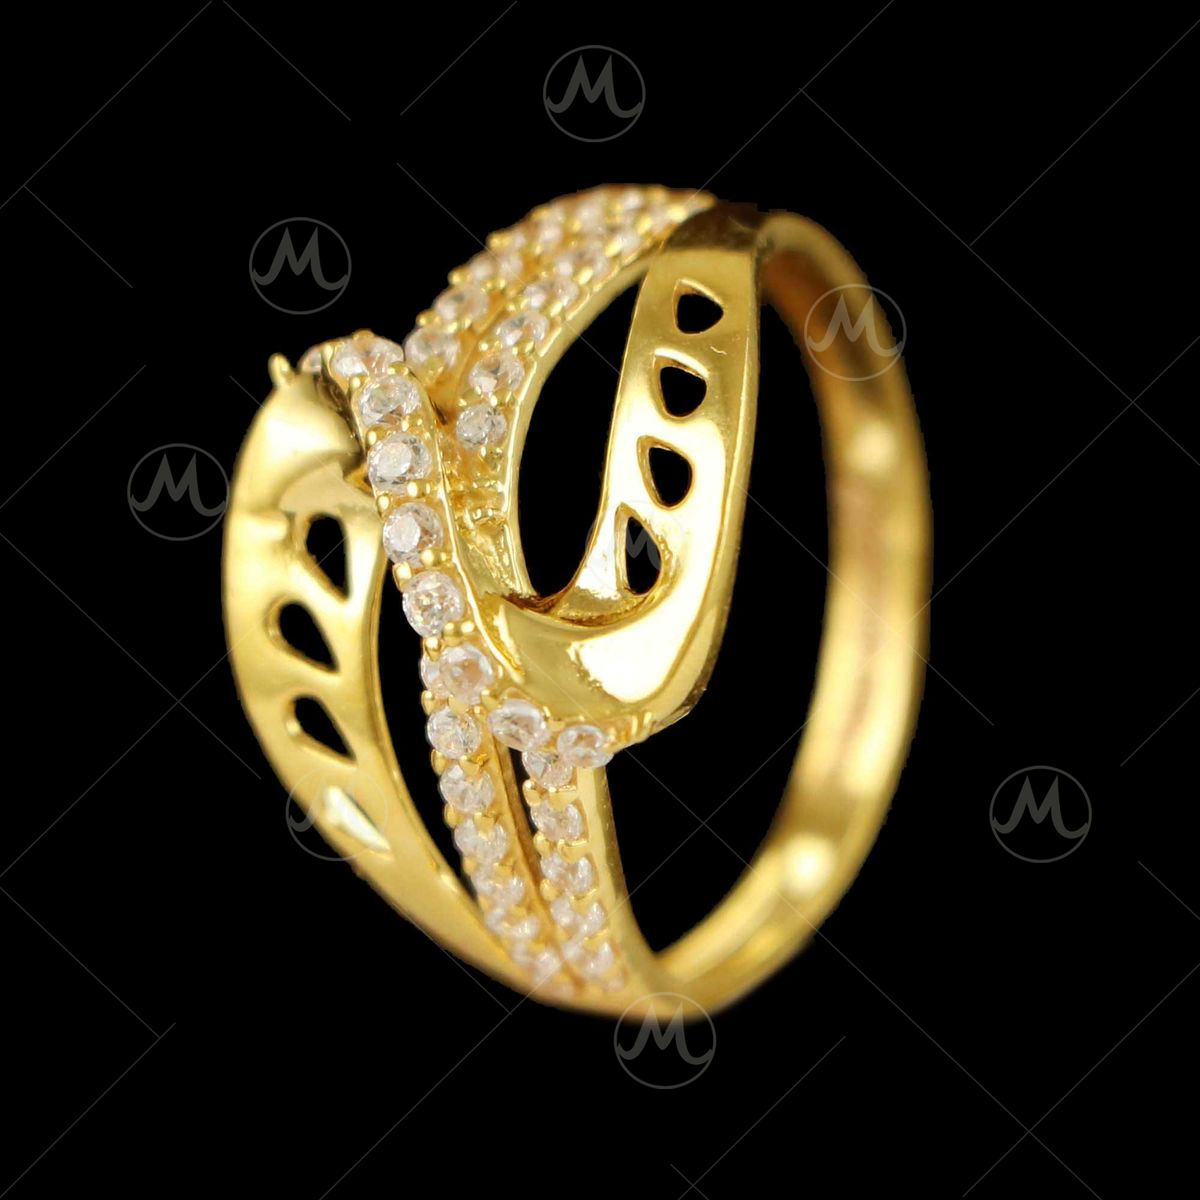 345 Gold Silver Rings Design for Female without Stone with Price | Silver ring  designs, Ring design for female, Ring designs